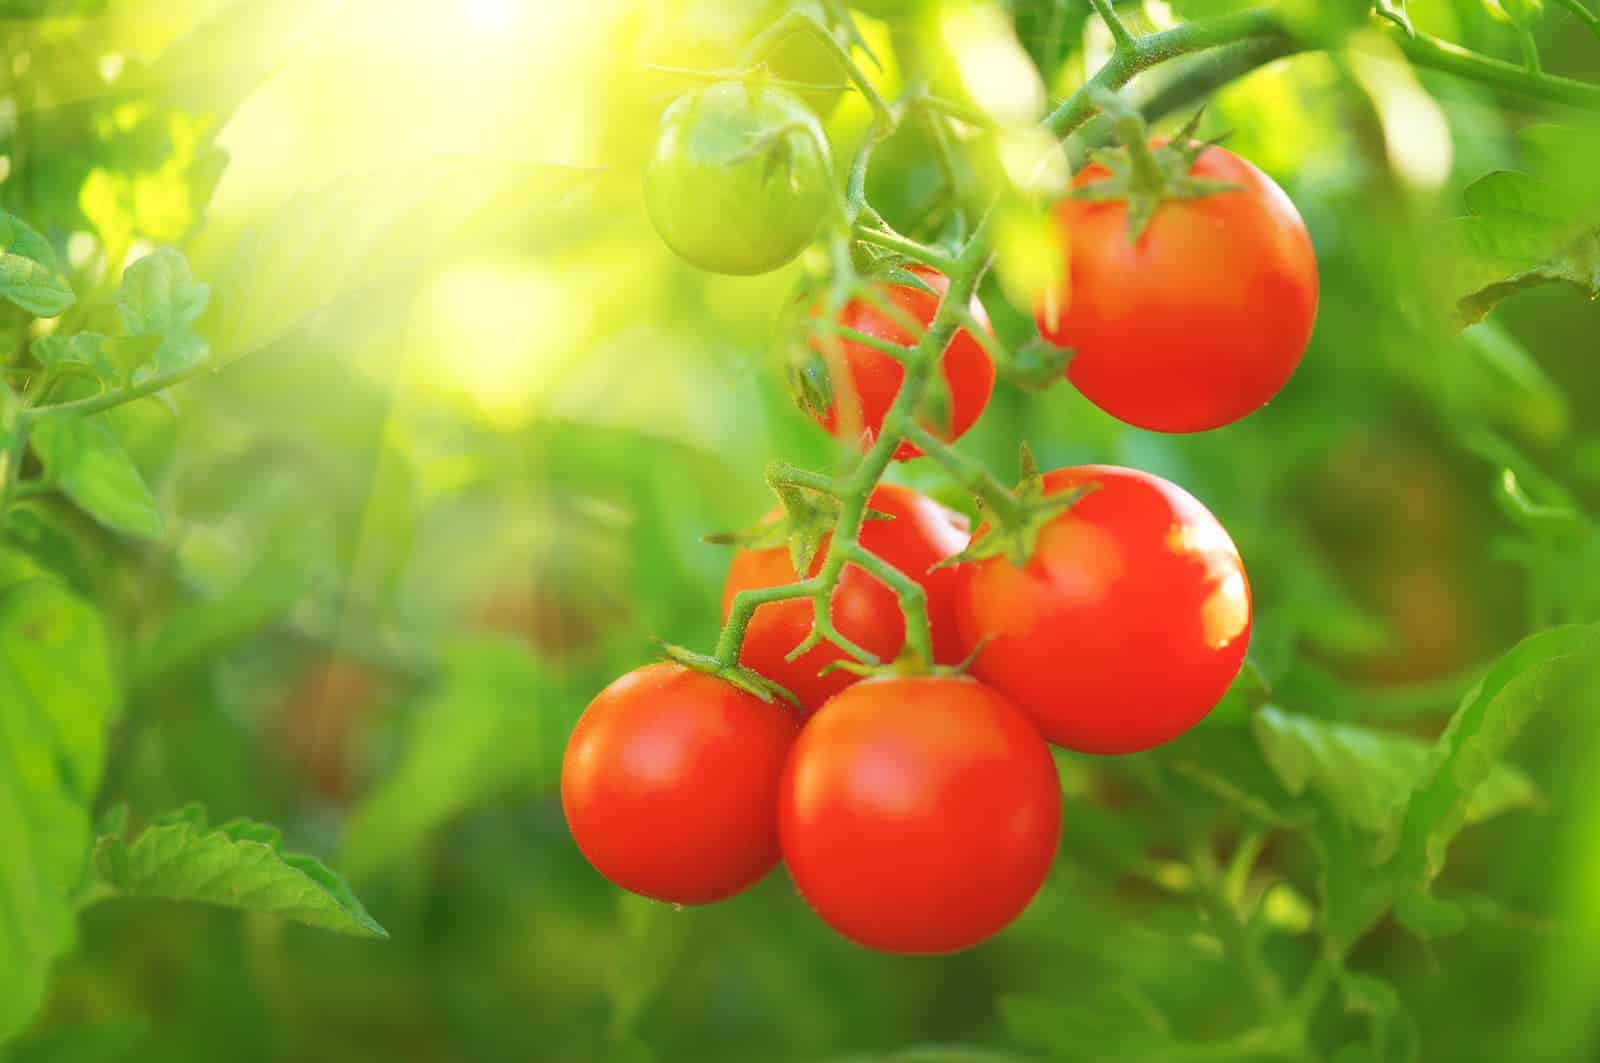 Growing Solar Flare tomatoes